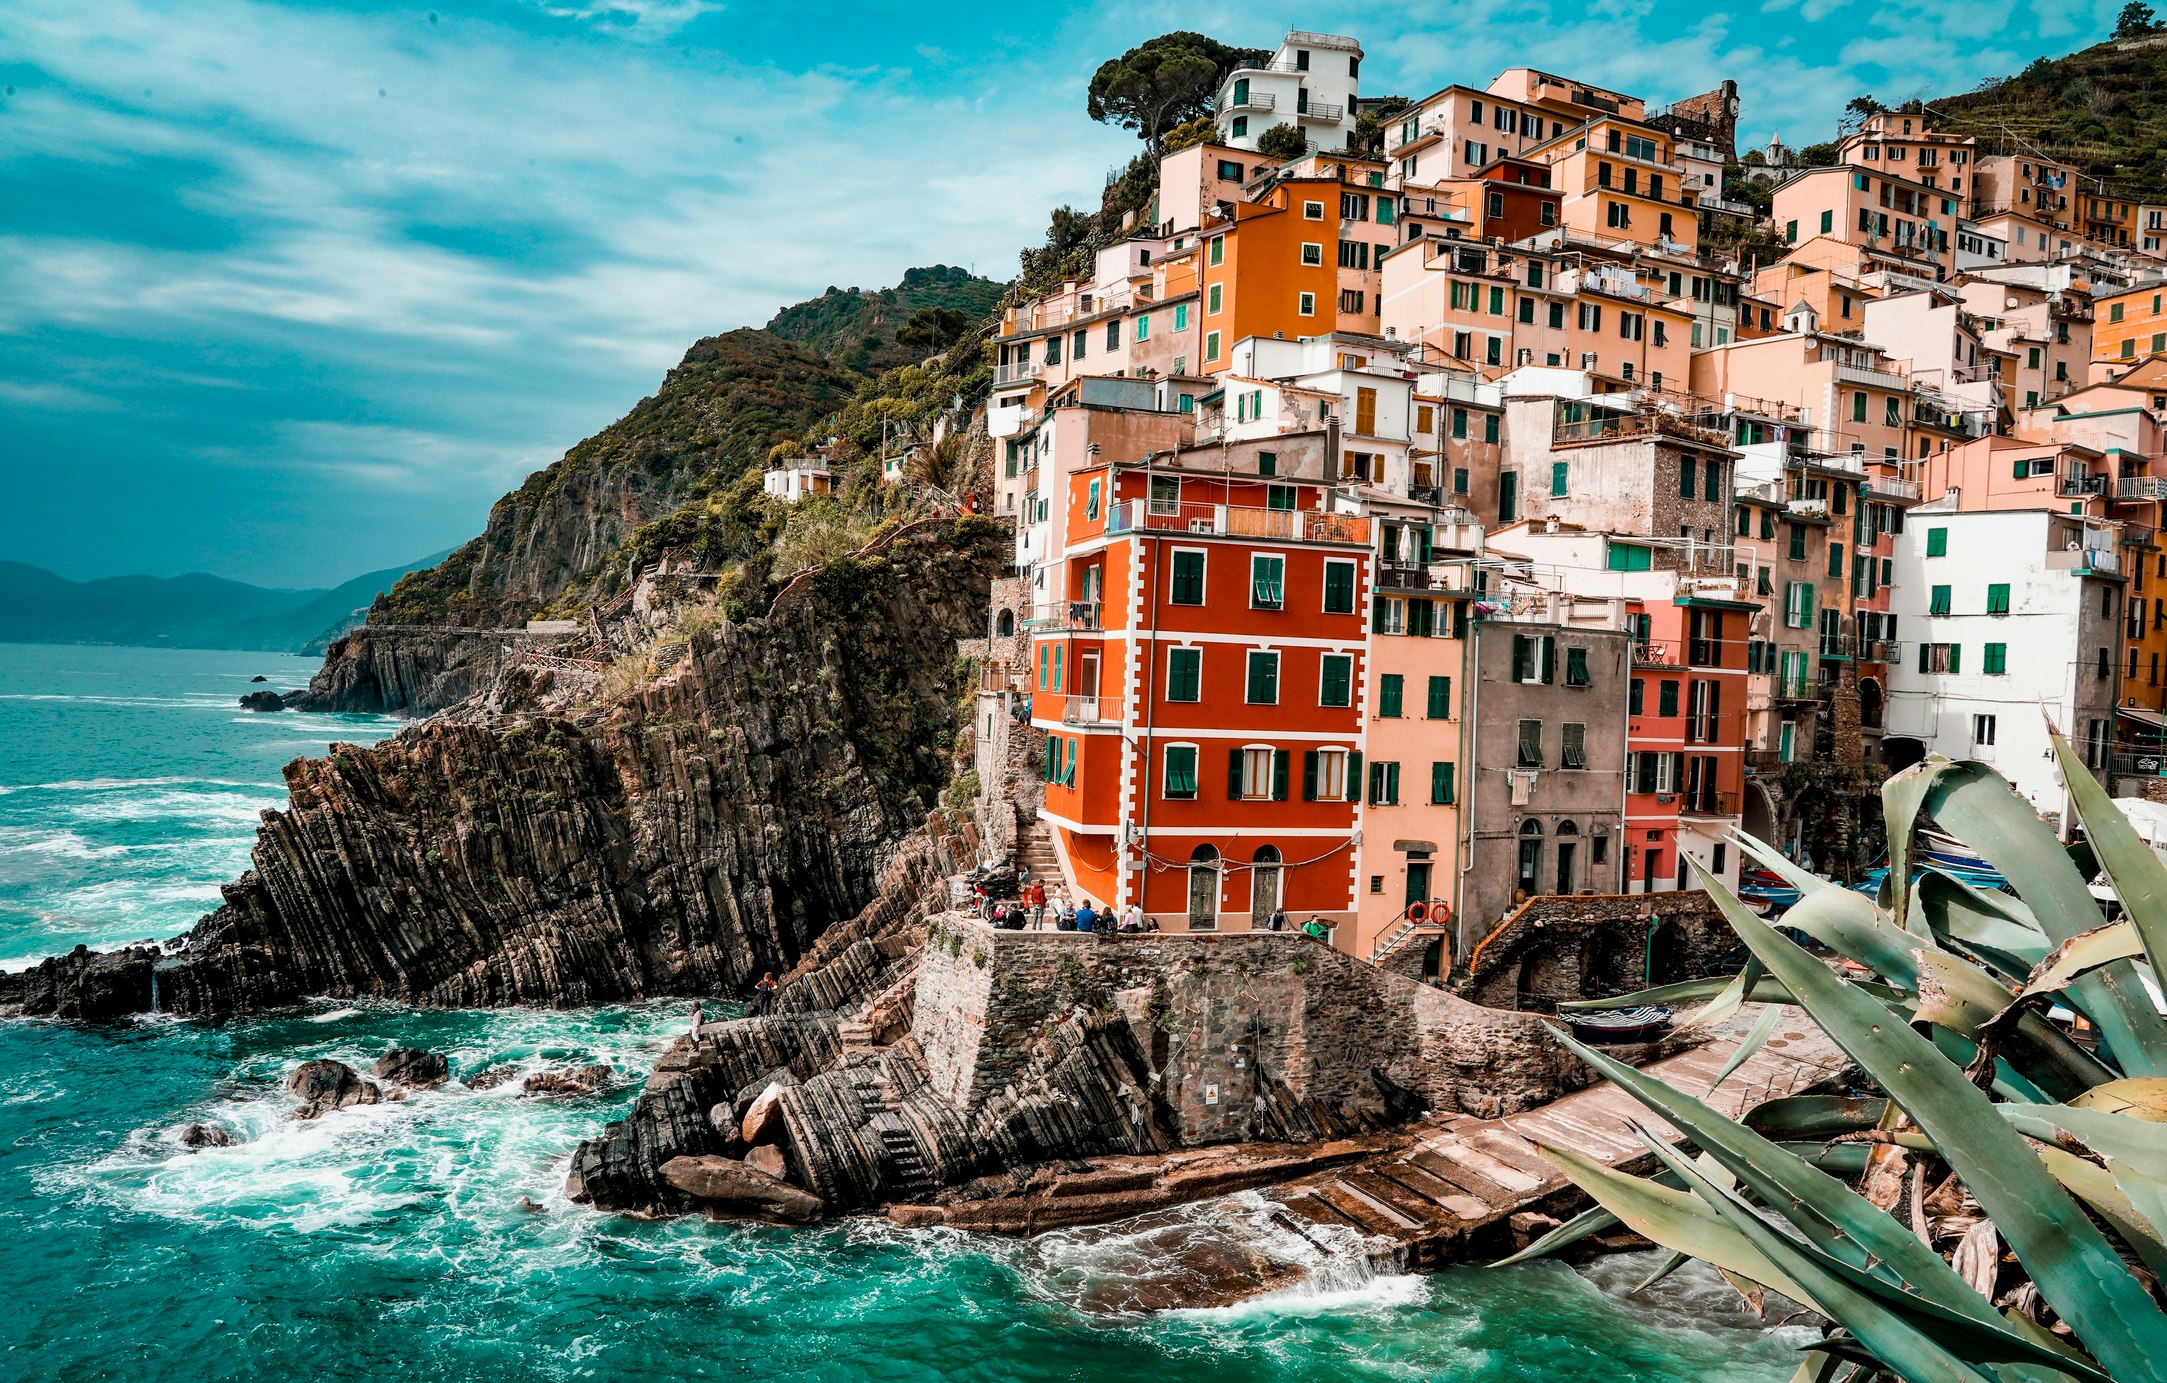 A beautiful shot of the town of Riomaggiore, with its coloured houses and rugged shoreline